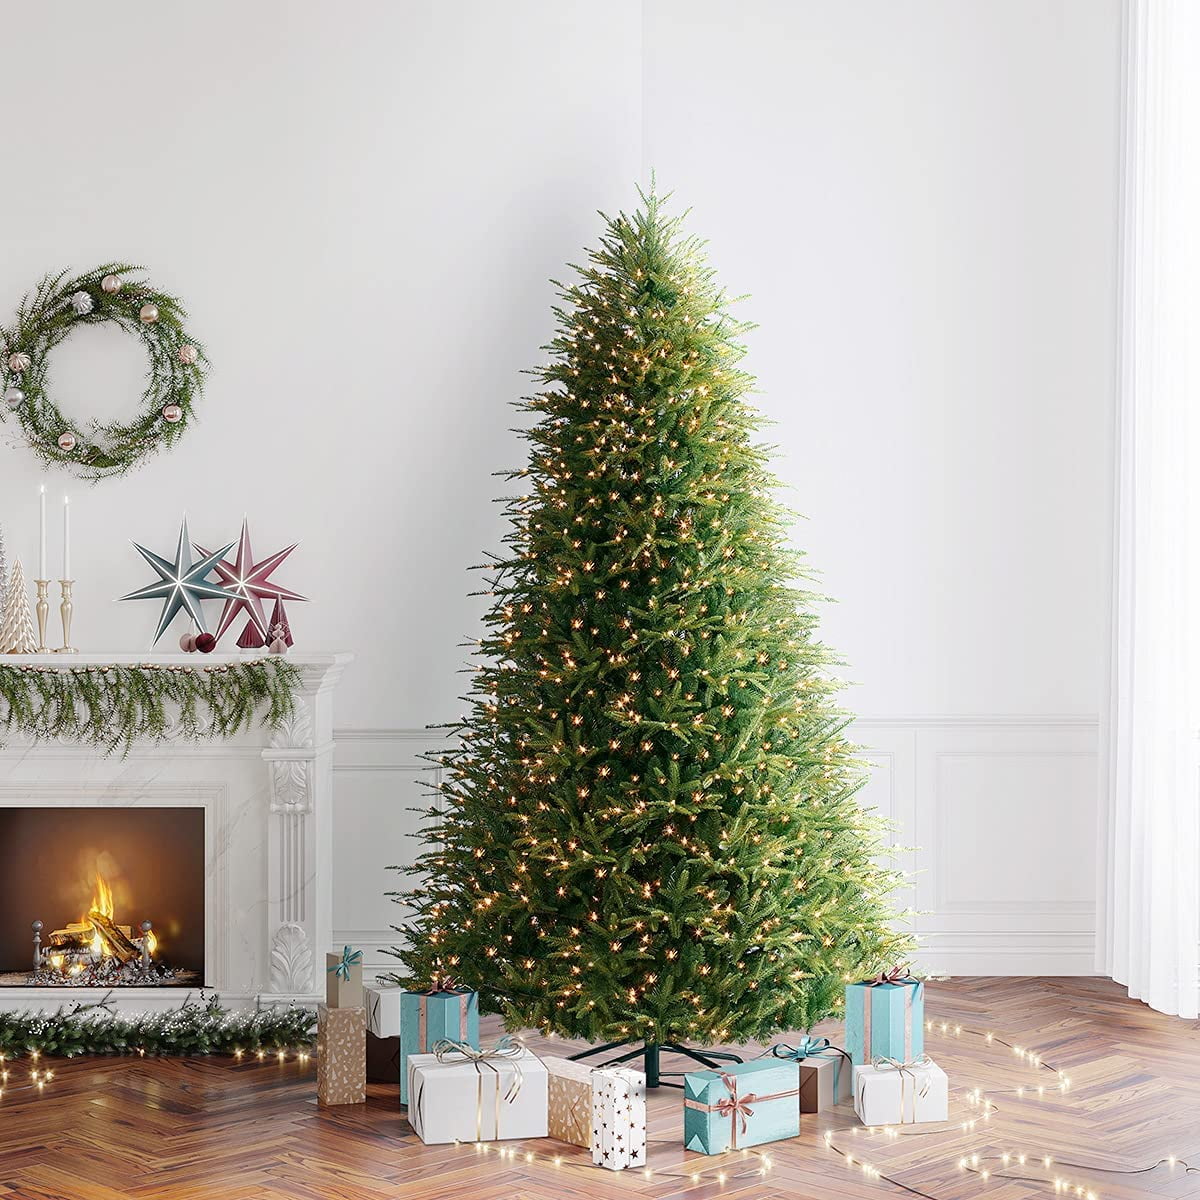 OasisCraft 6.5FT Prelit Artificial Christmas Tree - Hinged Full Spruce ...